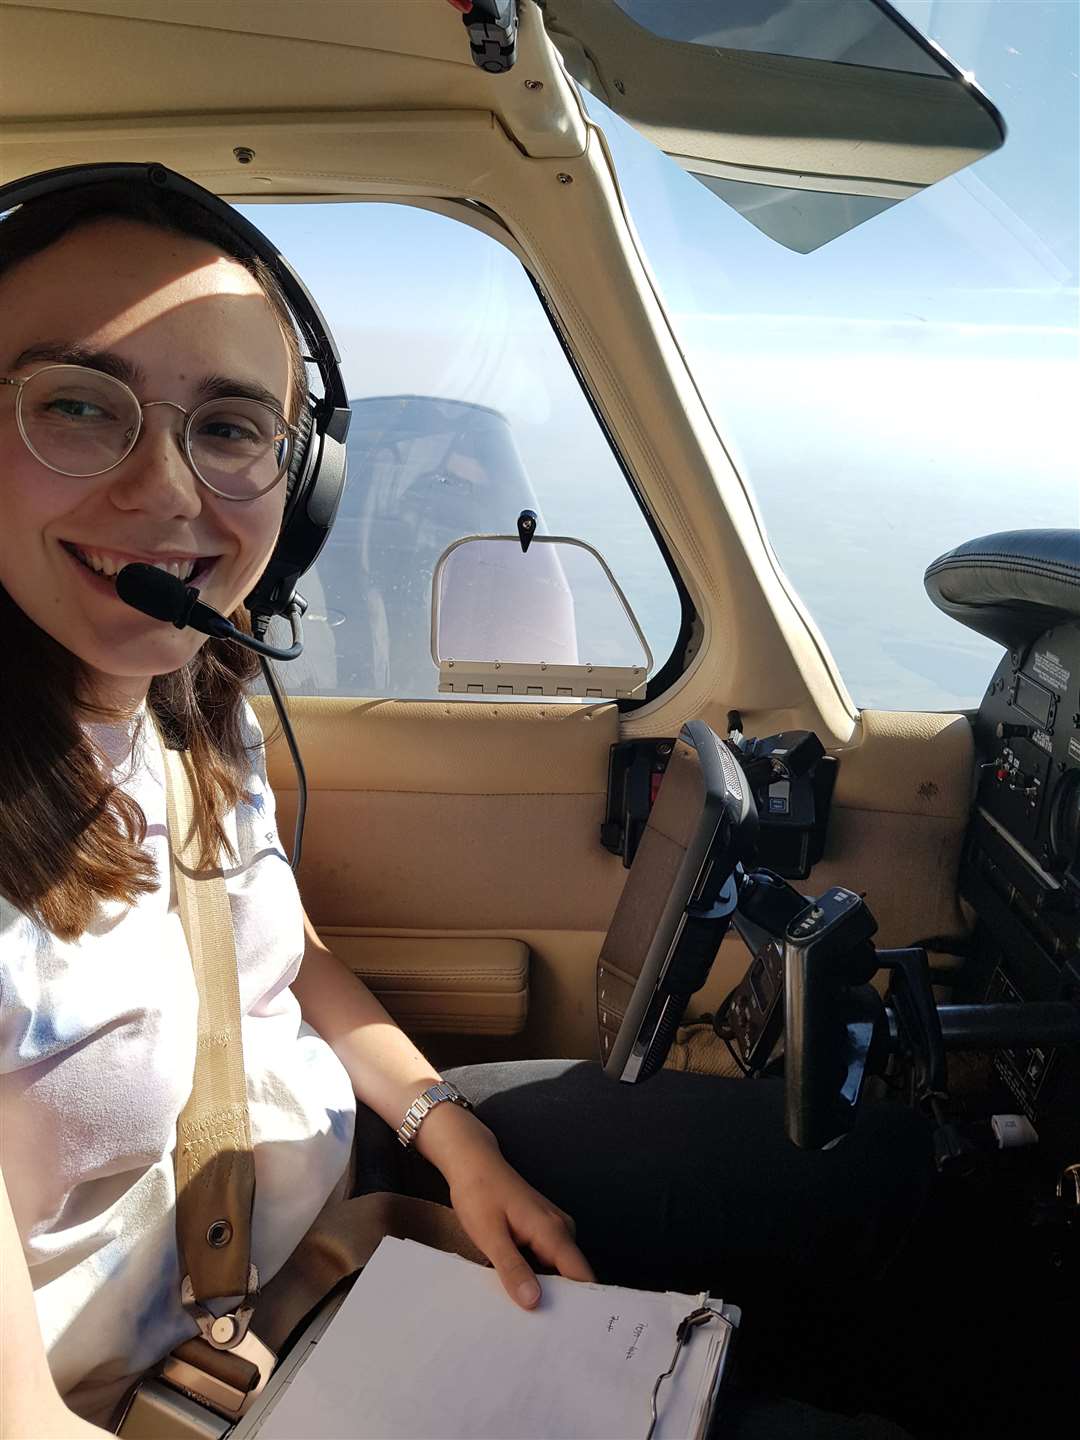 The 19-year-old says her aim is to encourage girls and young women to pursue their dreams. Picture: Flyzolo and Beatrice De Smet